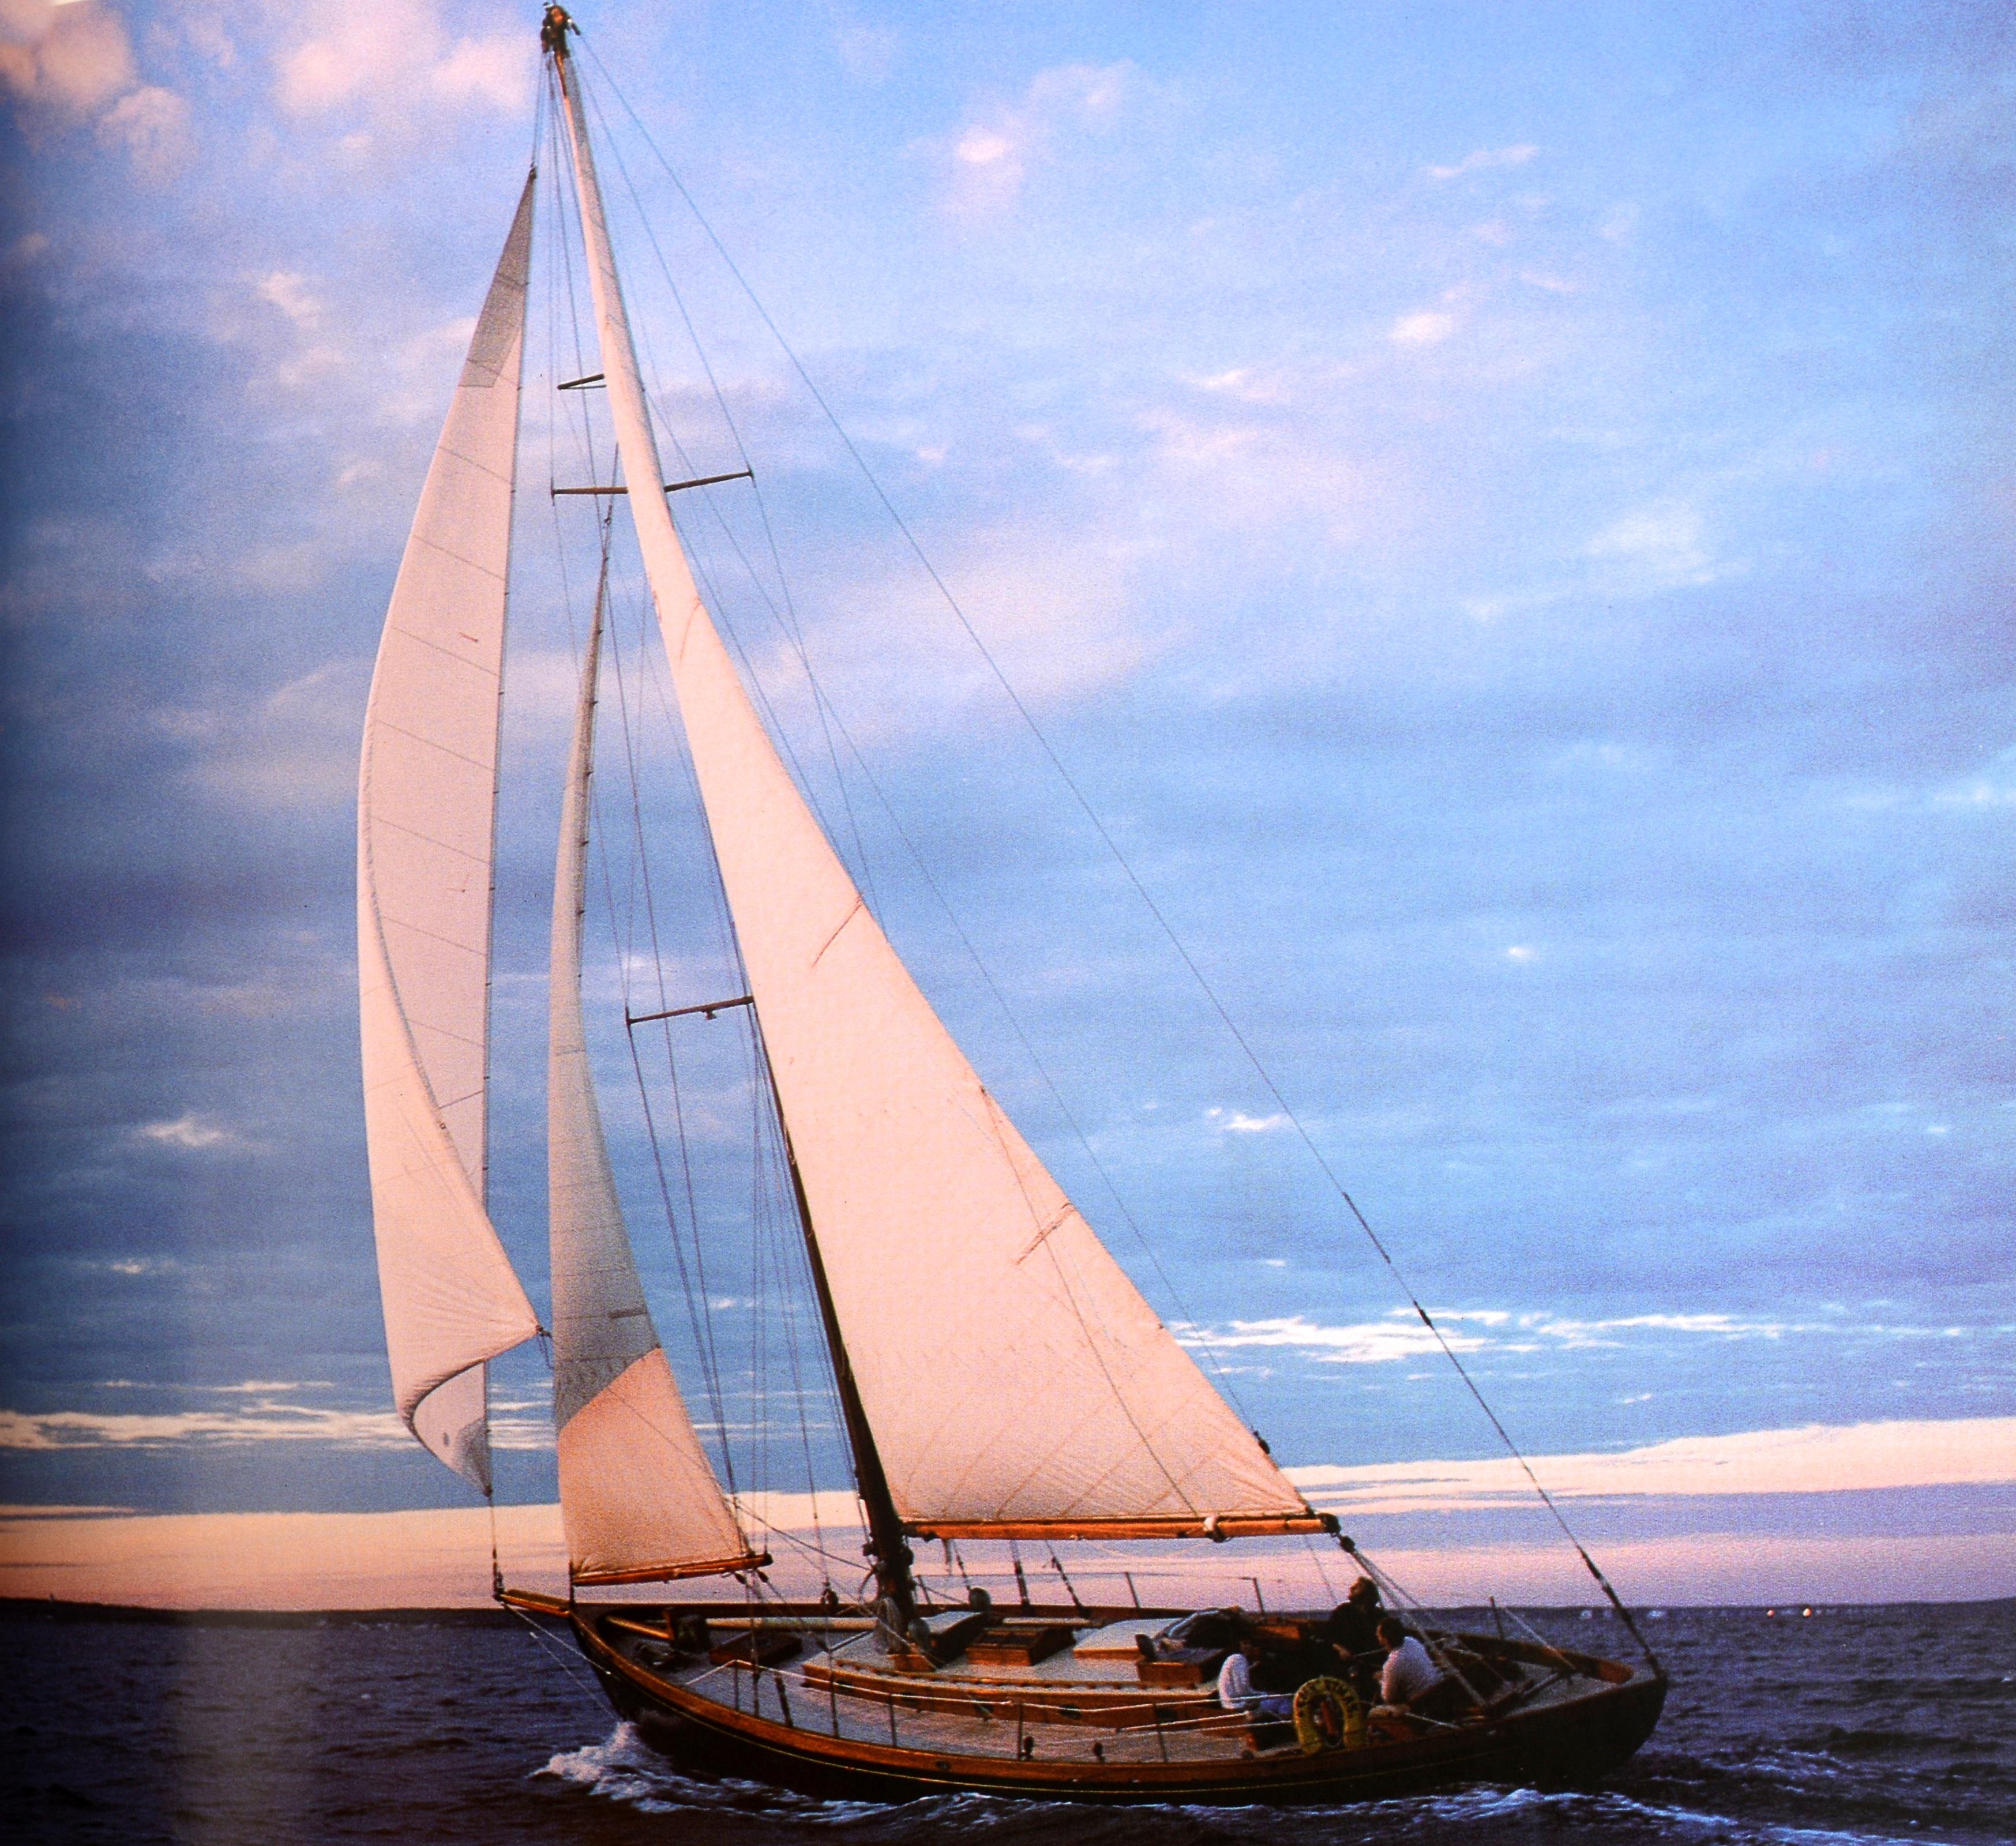 Wood, Water, and Light: Classic Wooden Boats by Joel White. Published by W. W. Norton & Company, 2000. Stated 1st Ed hardcover. Twenty-four wooden boats are featured in this volume, among them classic sailing yachts and rugged schooners as well as